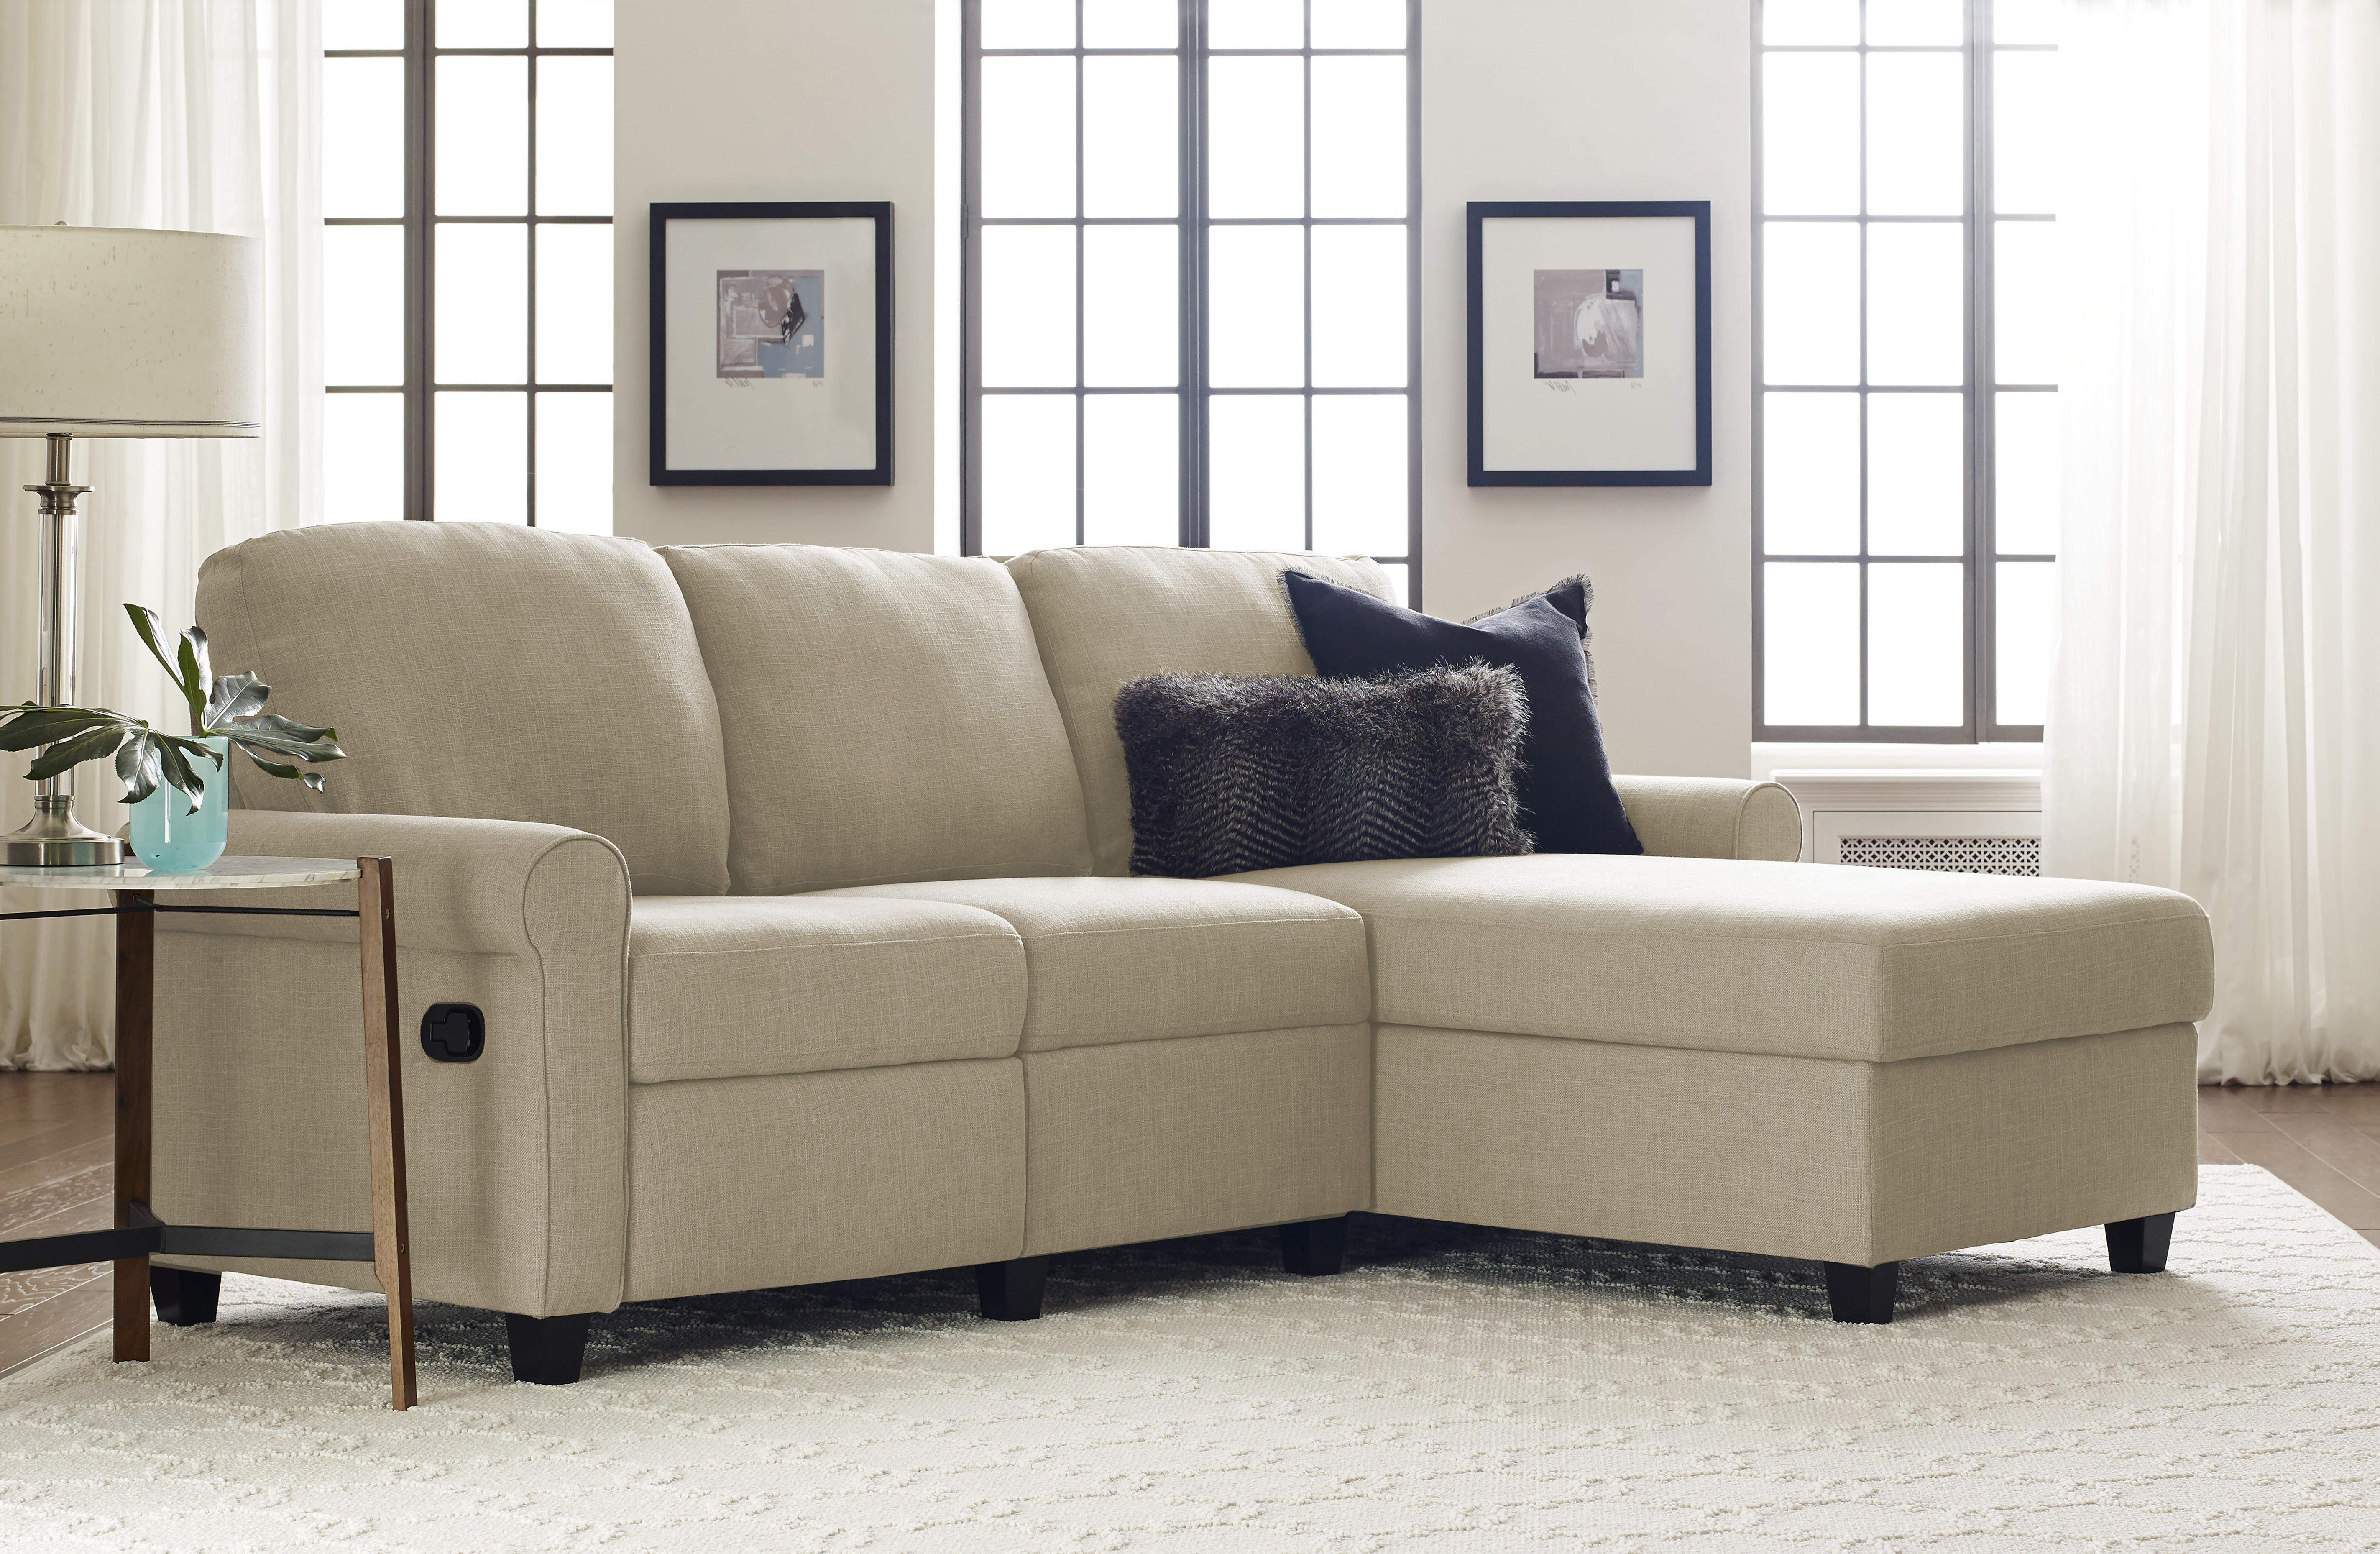 Serta Copenhagen Reclining Sectional with Right Storage Chaise - Oatmeal - image 4 of 9